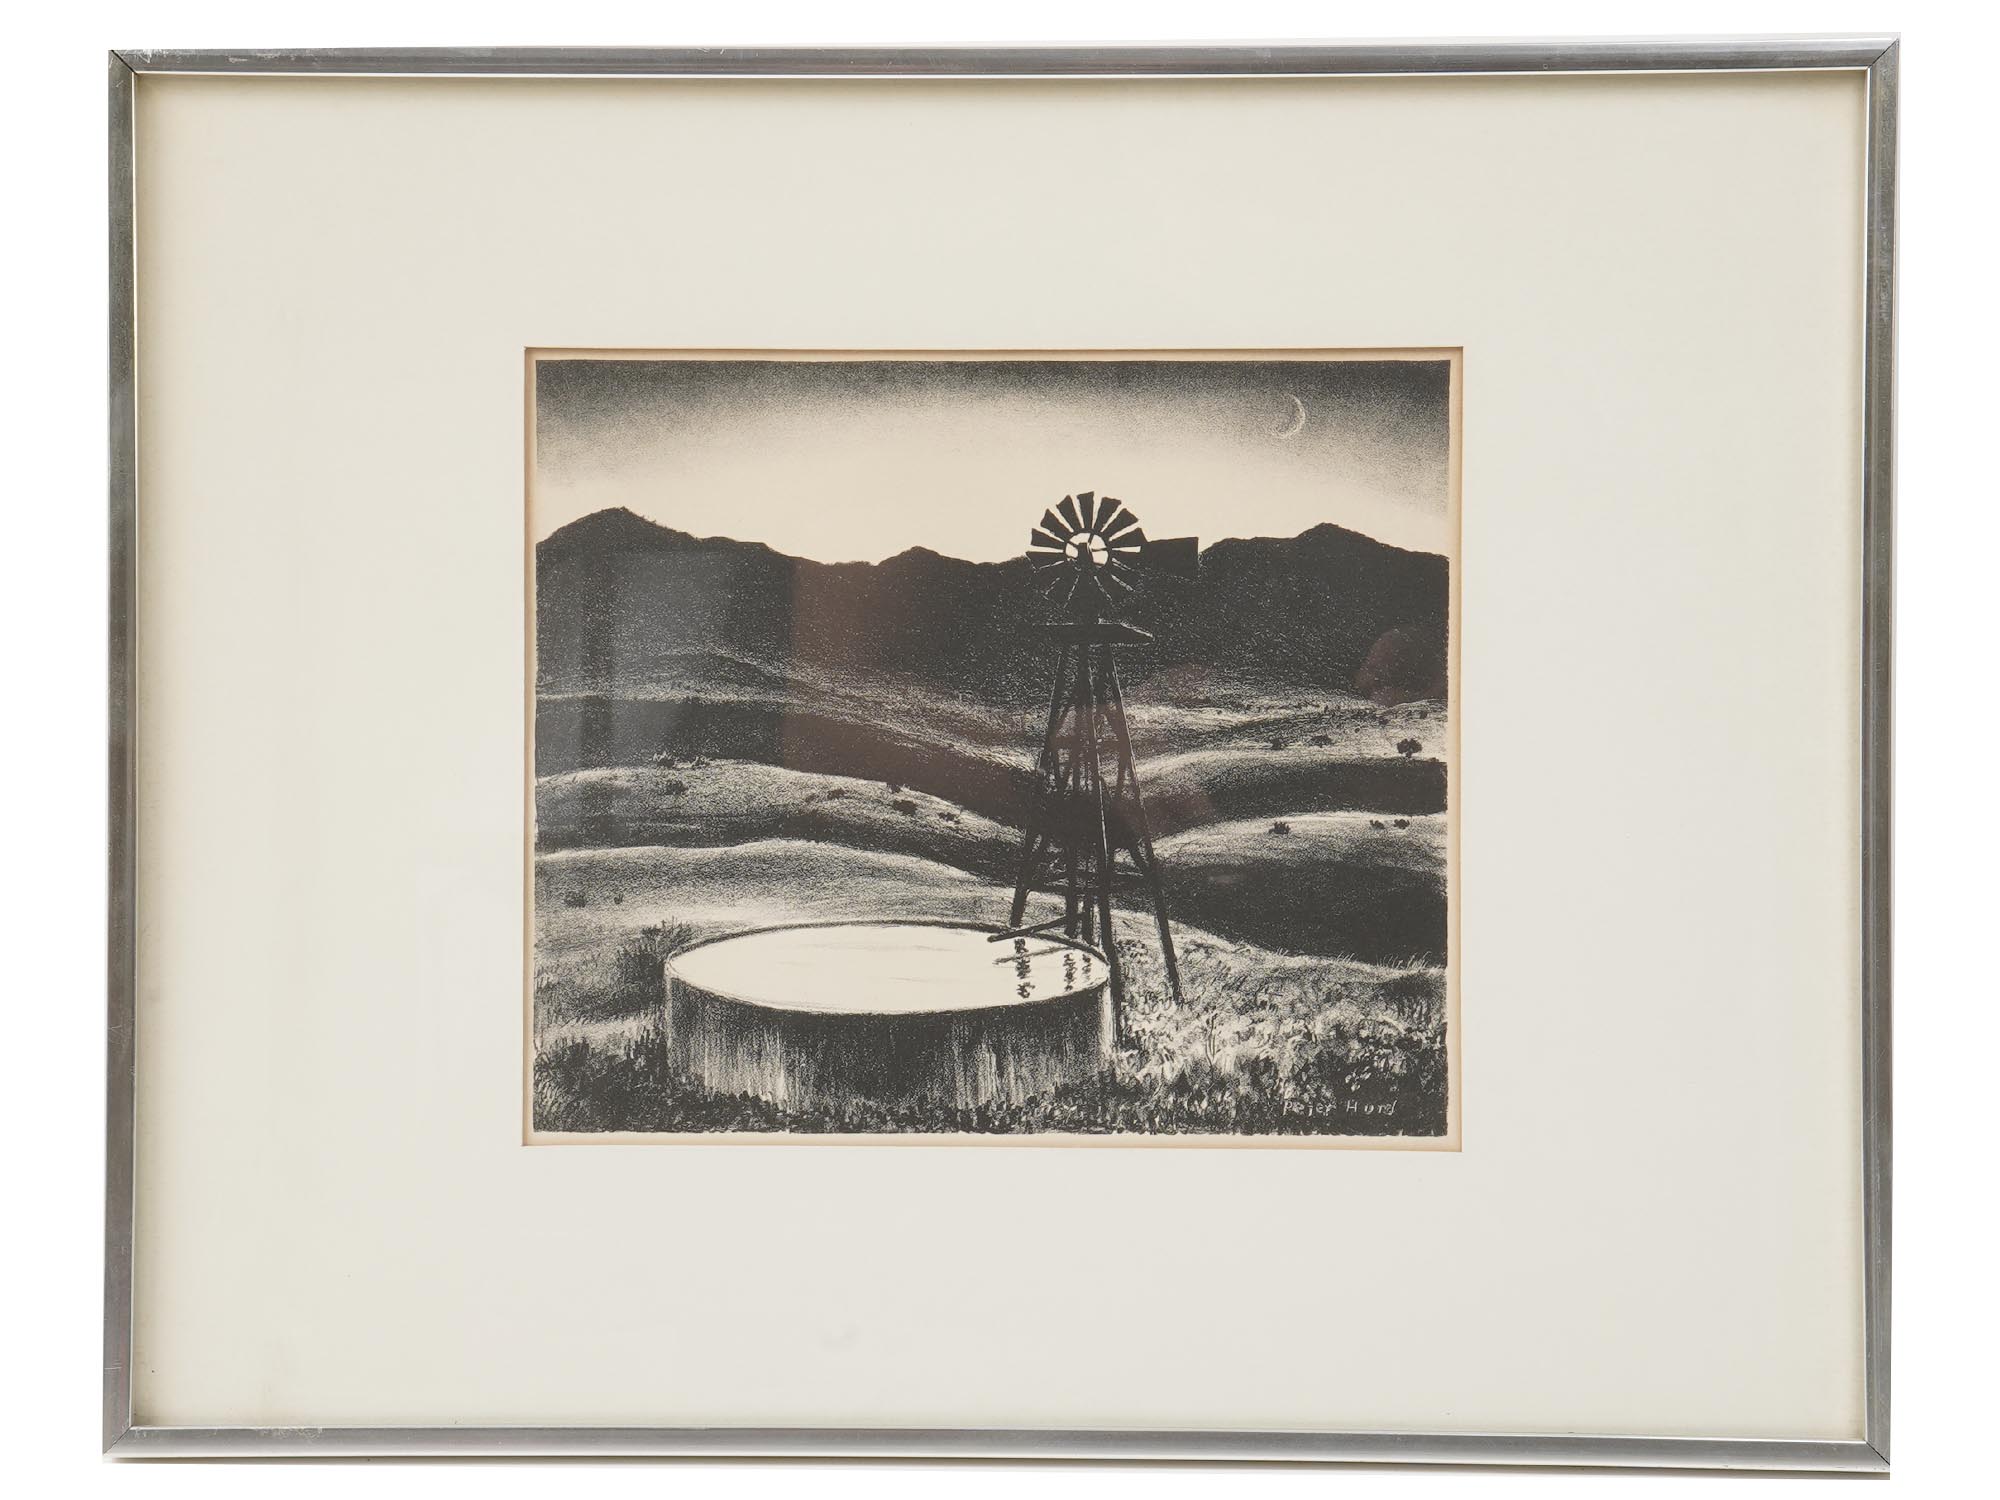 AMERICAN ETCHING LANDSCAPE BY PETER HURD